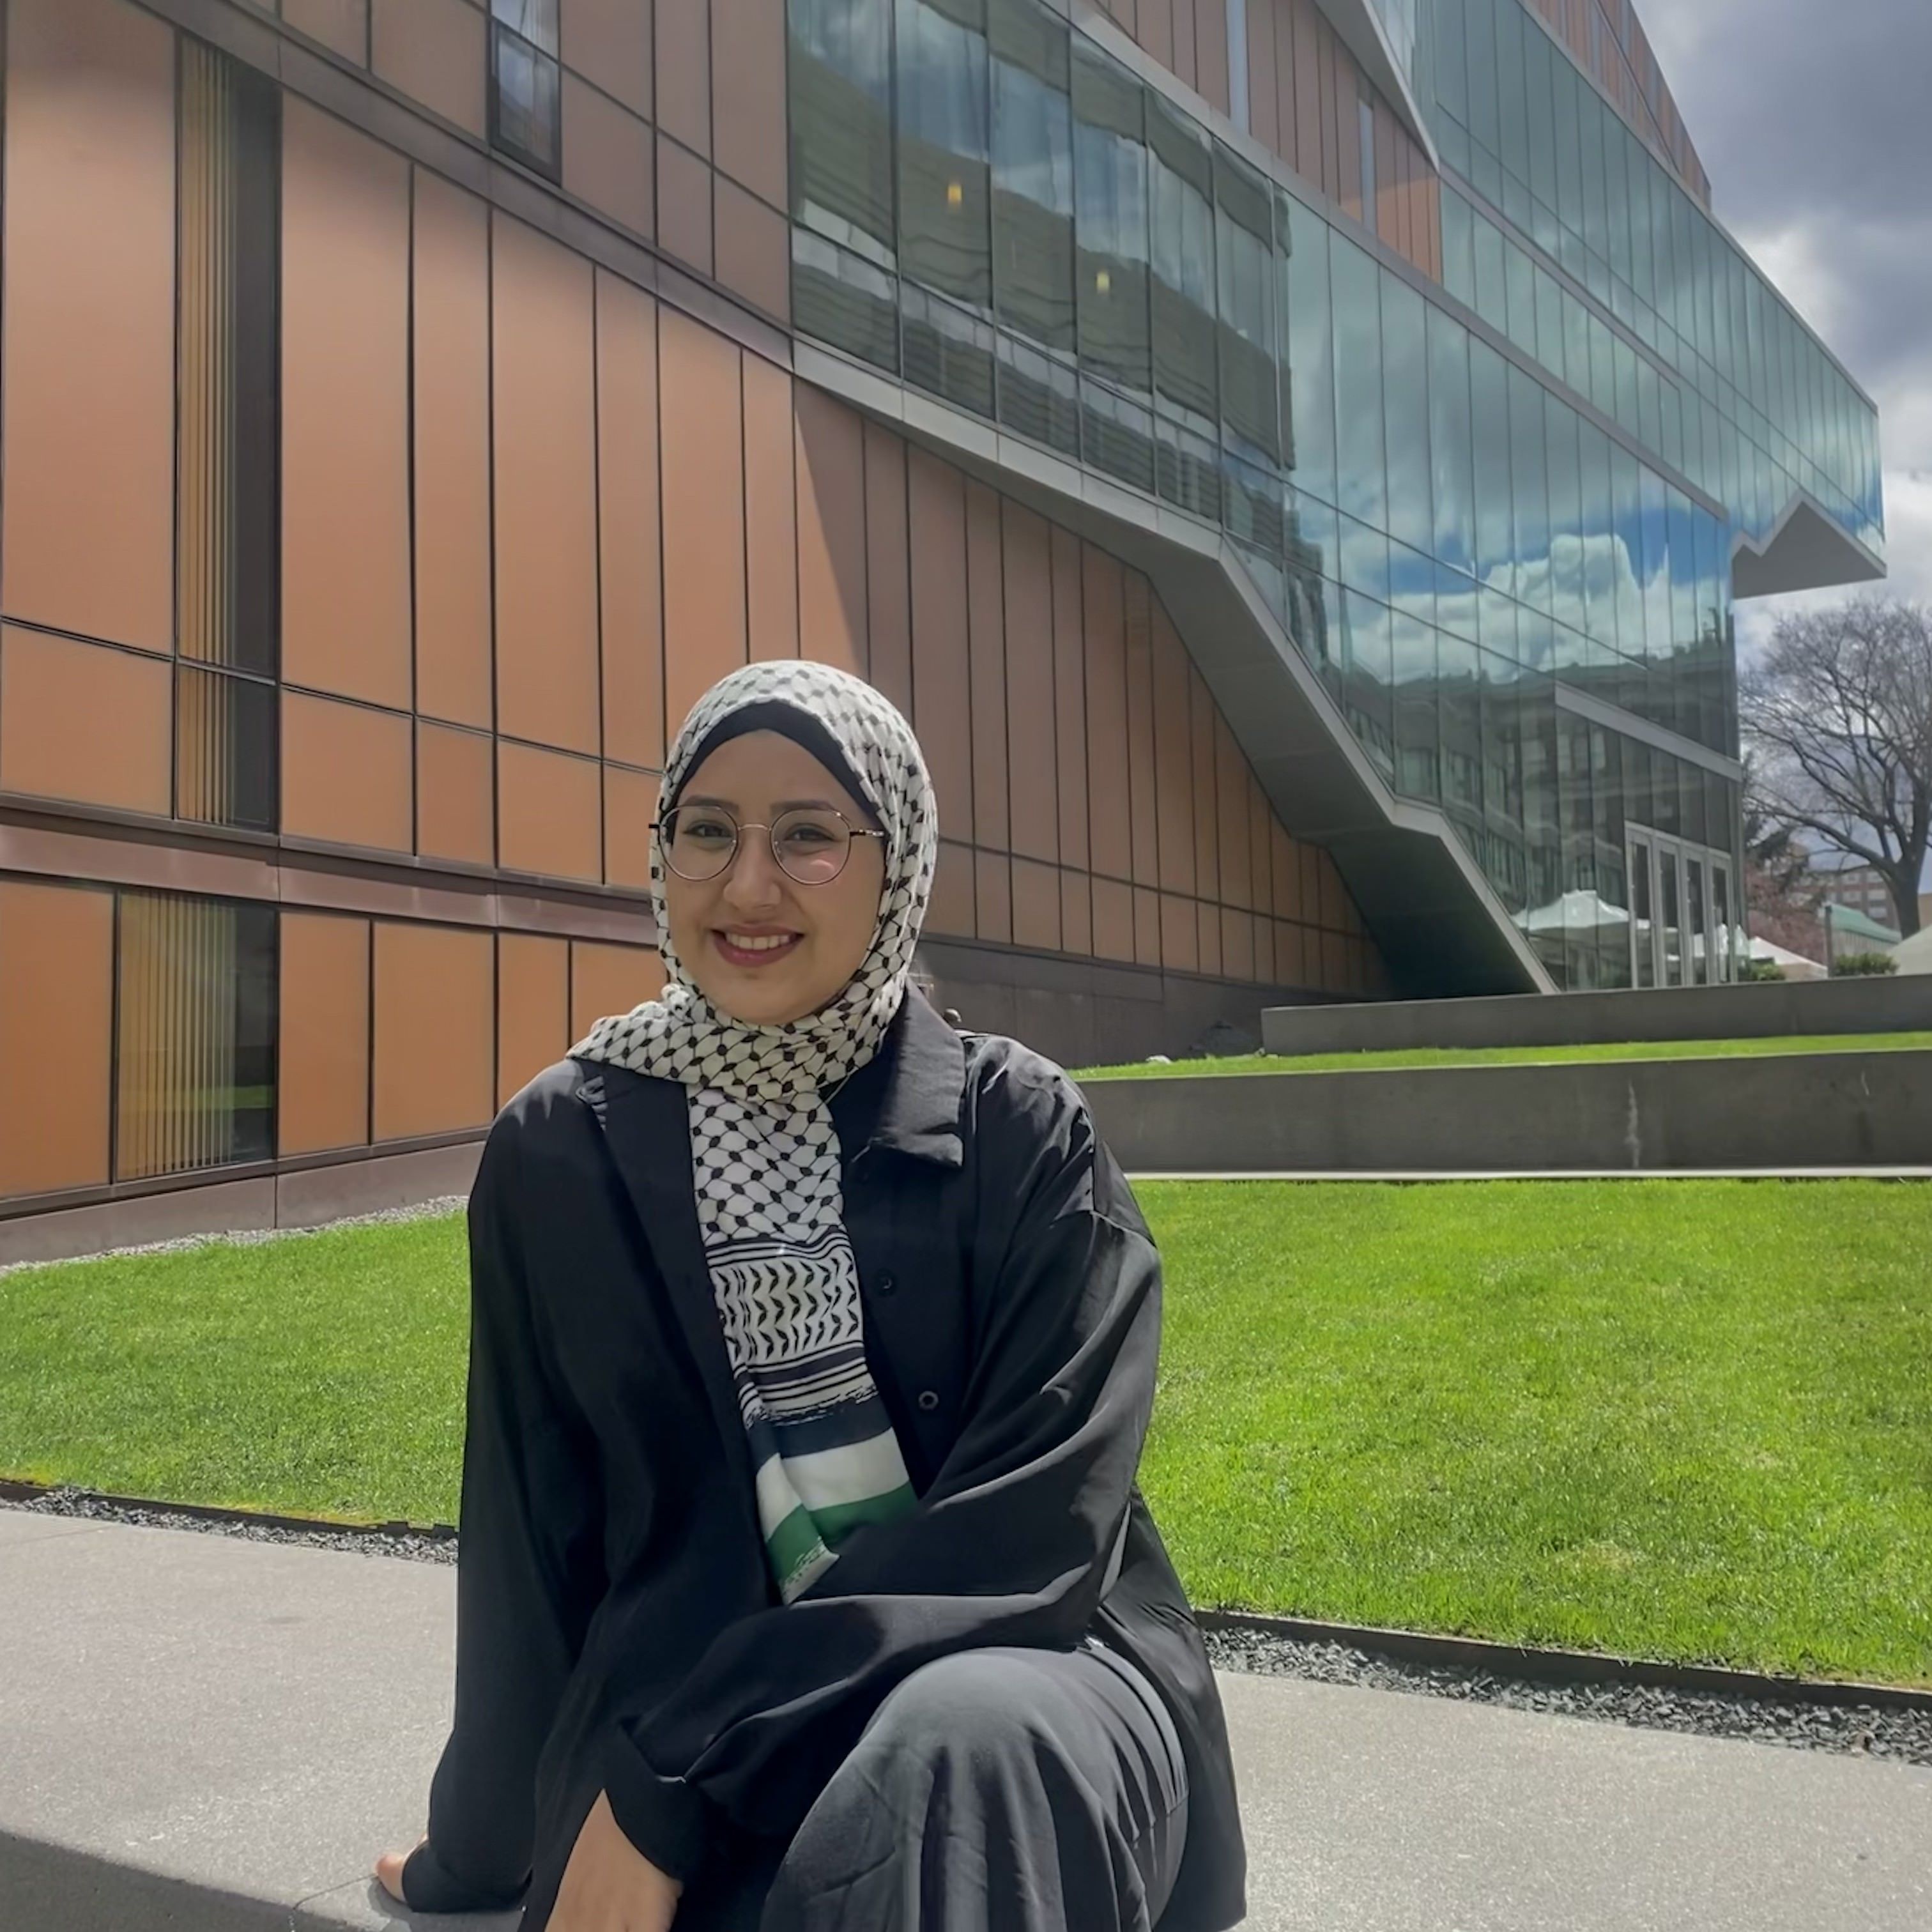 Aseel sitting in front of the Diana Center wearing black with a white patterned head scarf.